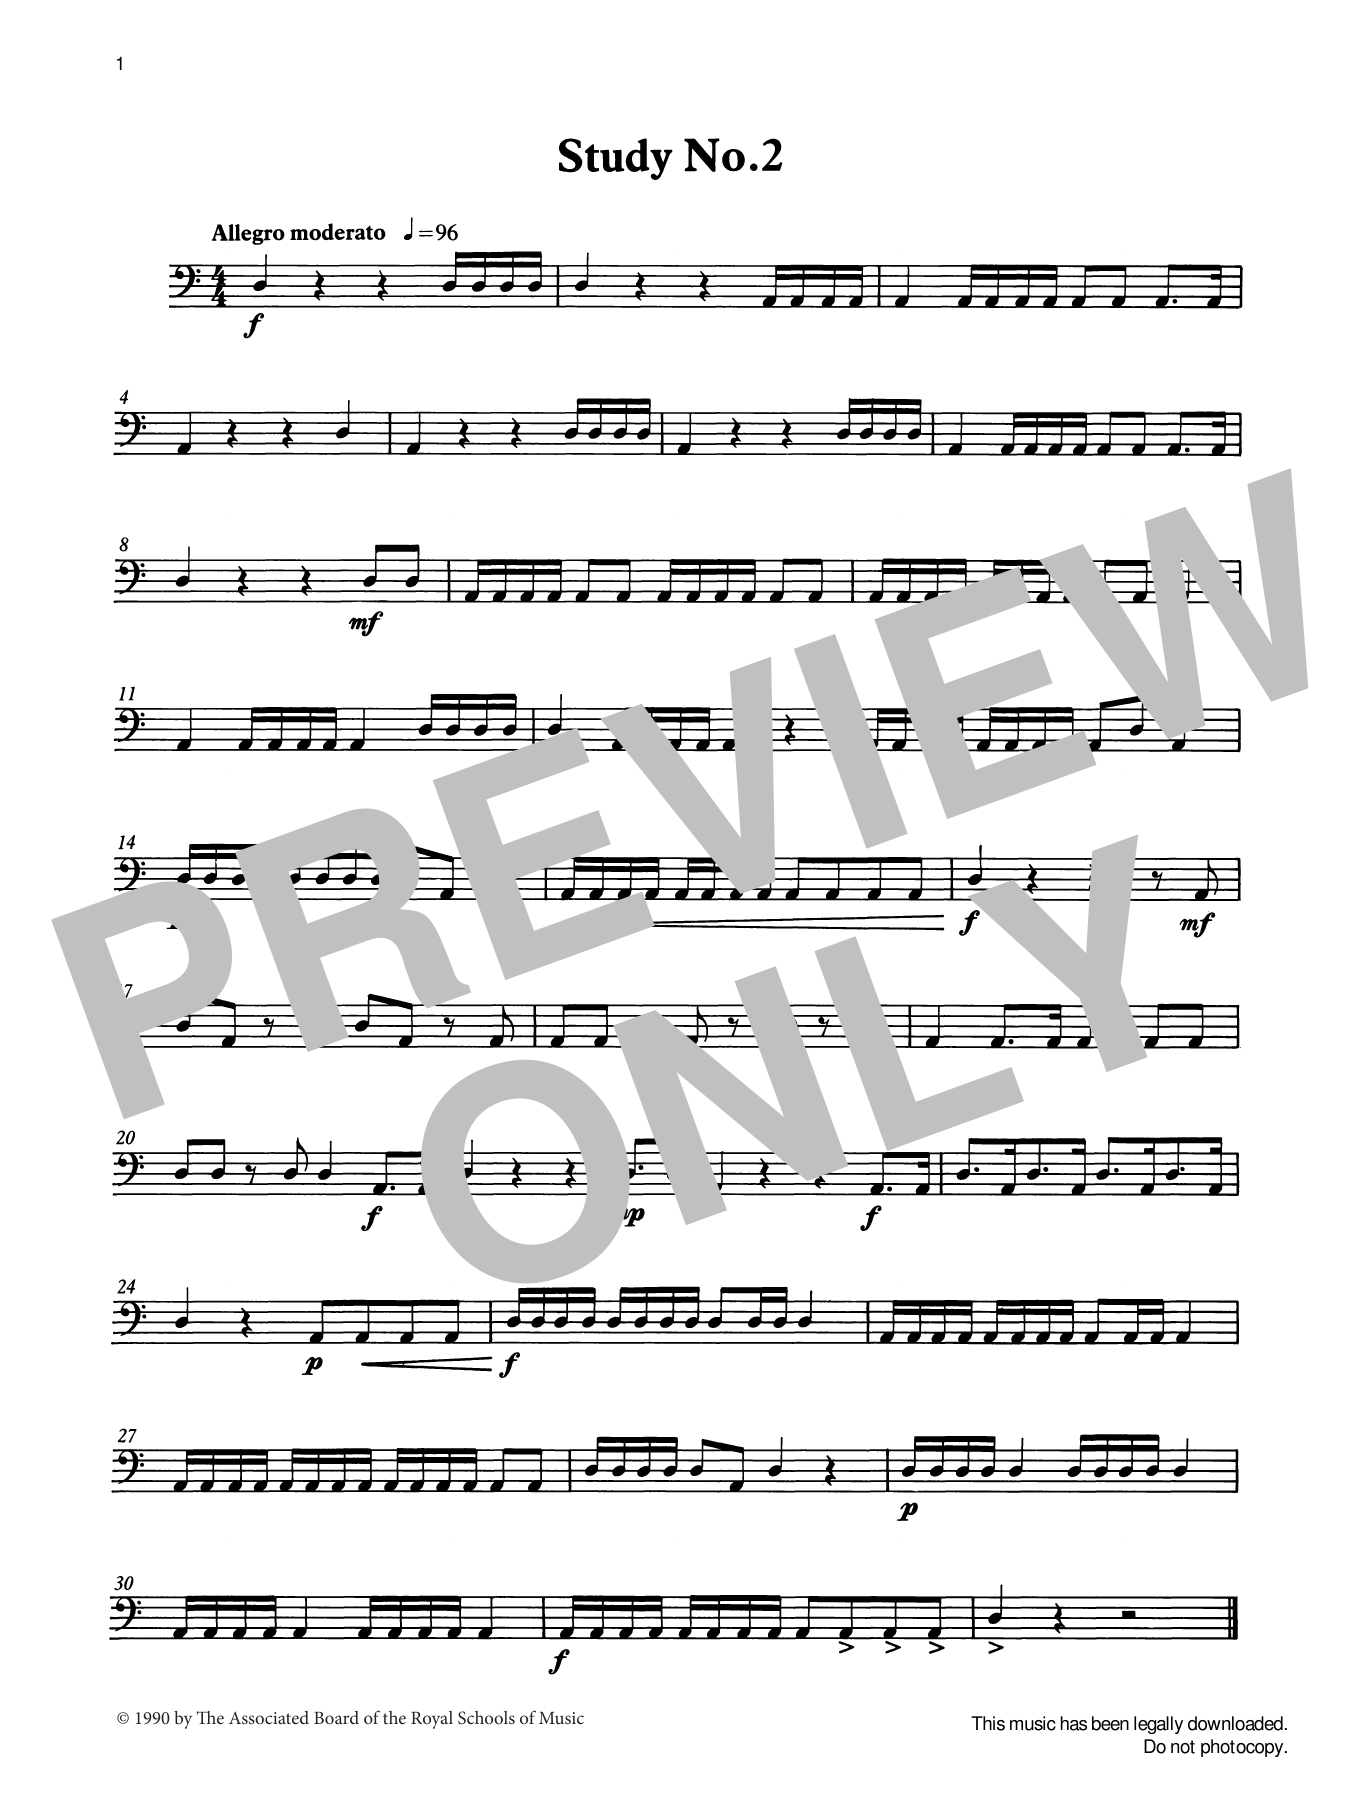 Download Ian Wright and Mark Bassey Study No.2 from Graded Music for Timpan Sheet Music